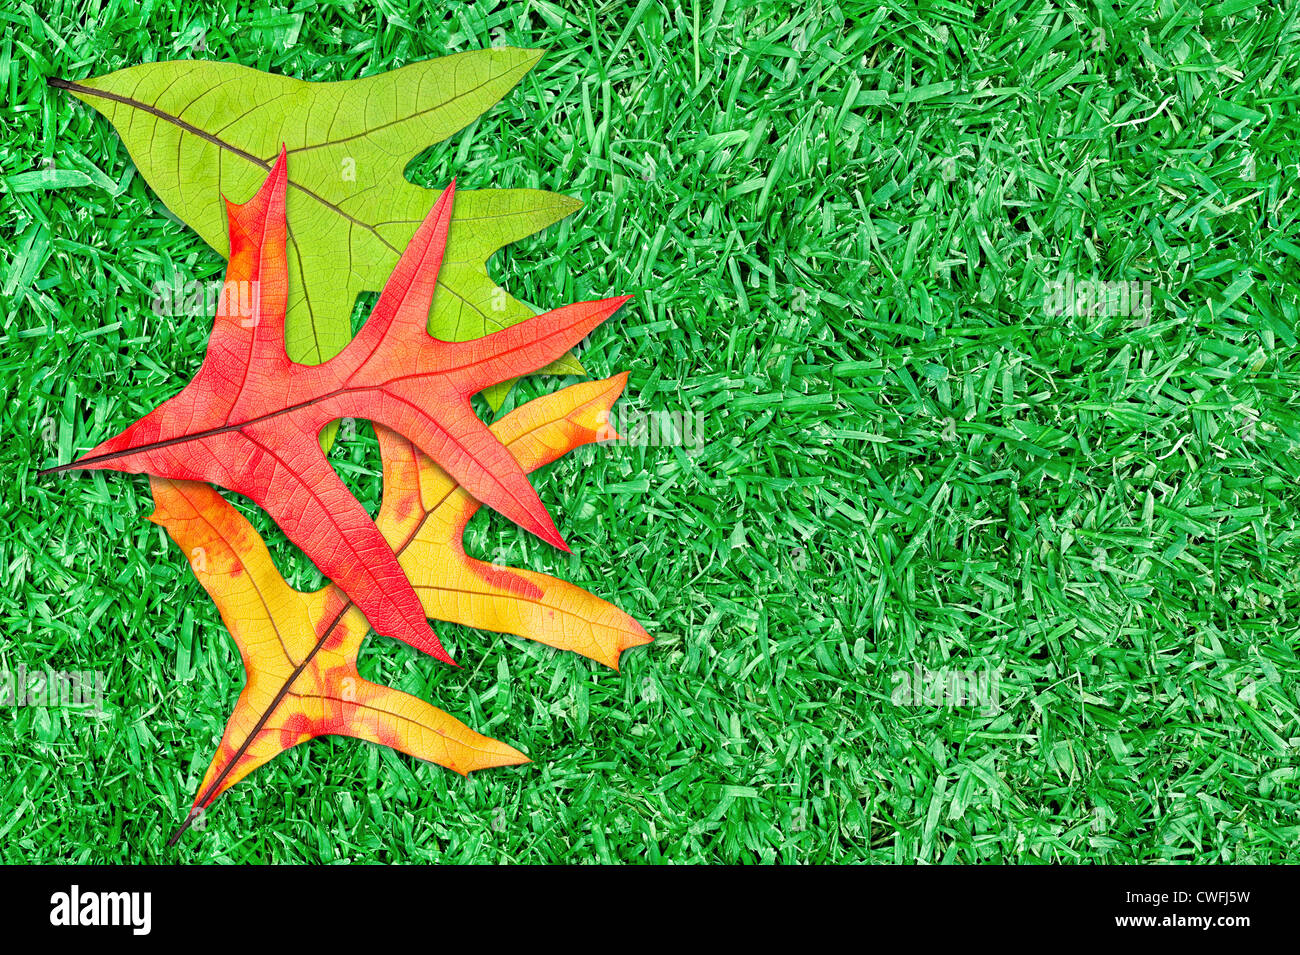 Fall foliage leaves of green, orange and yellow on grass. Copy can be placed on the blank area of grass. Stock Photo